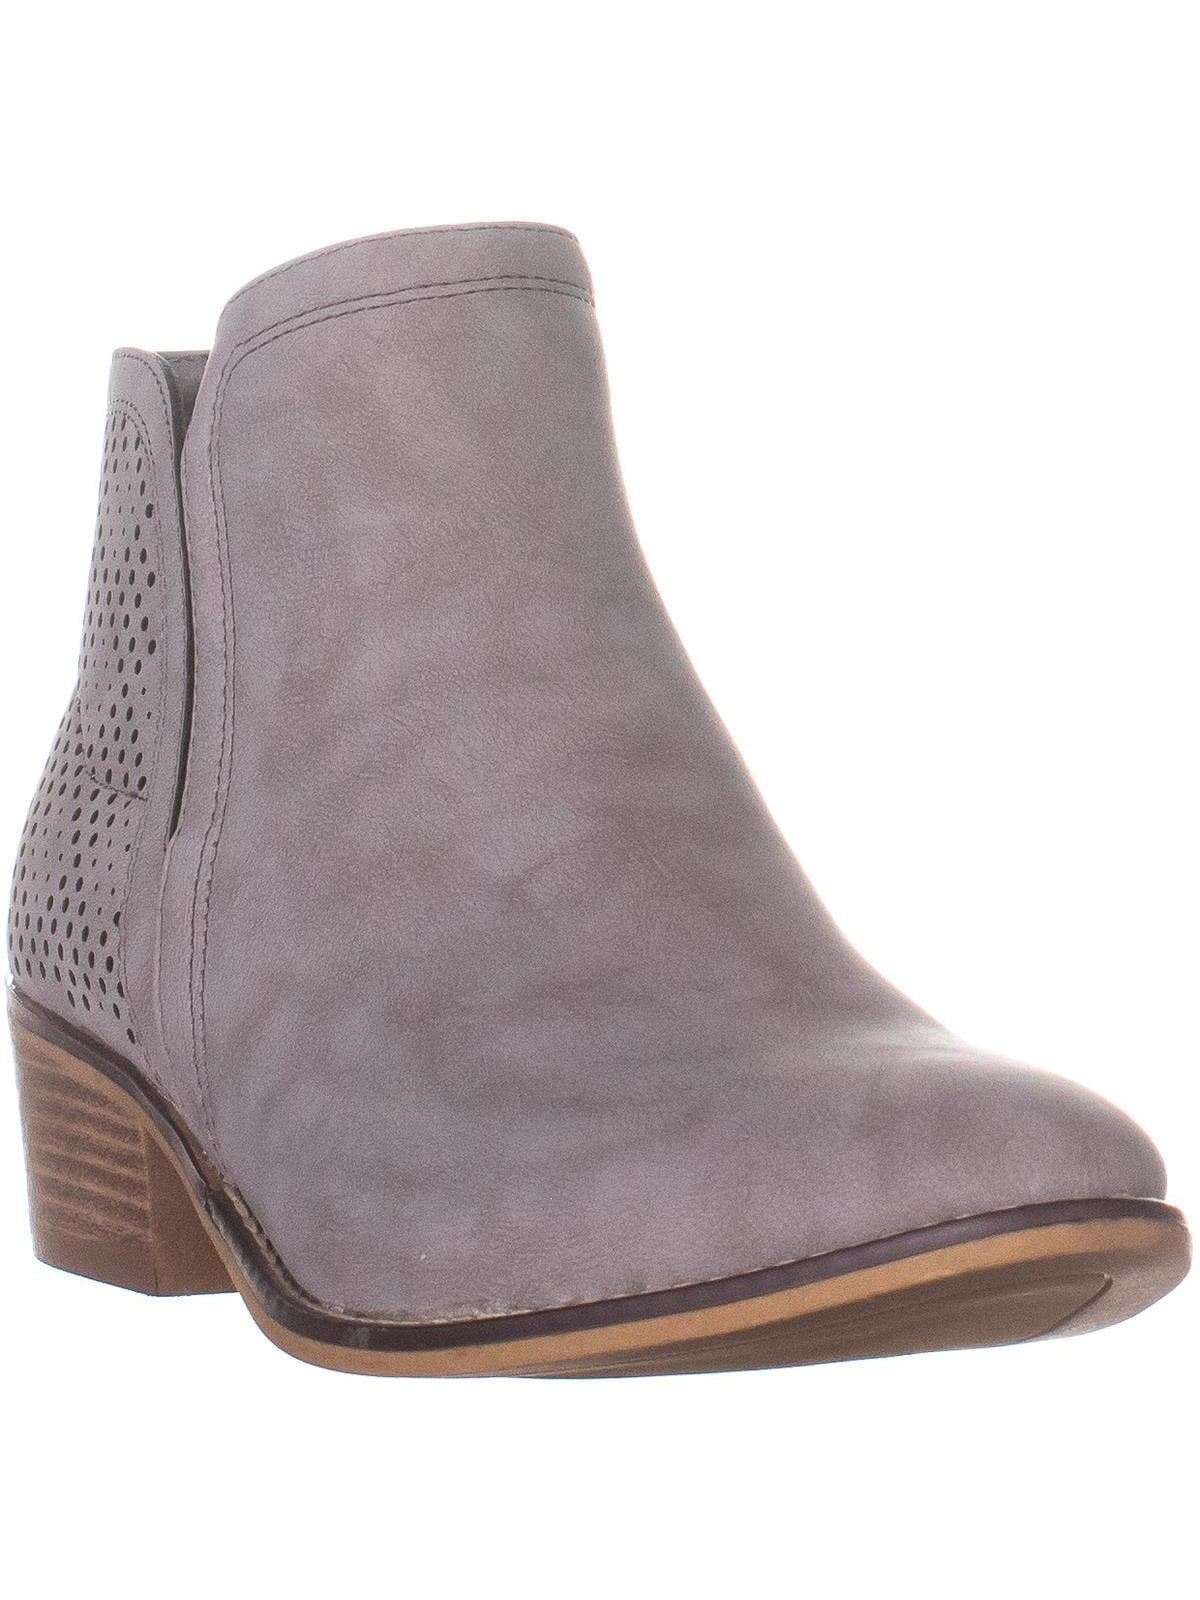 madden girl neville ankle booties